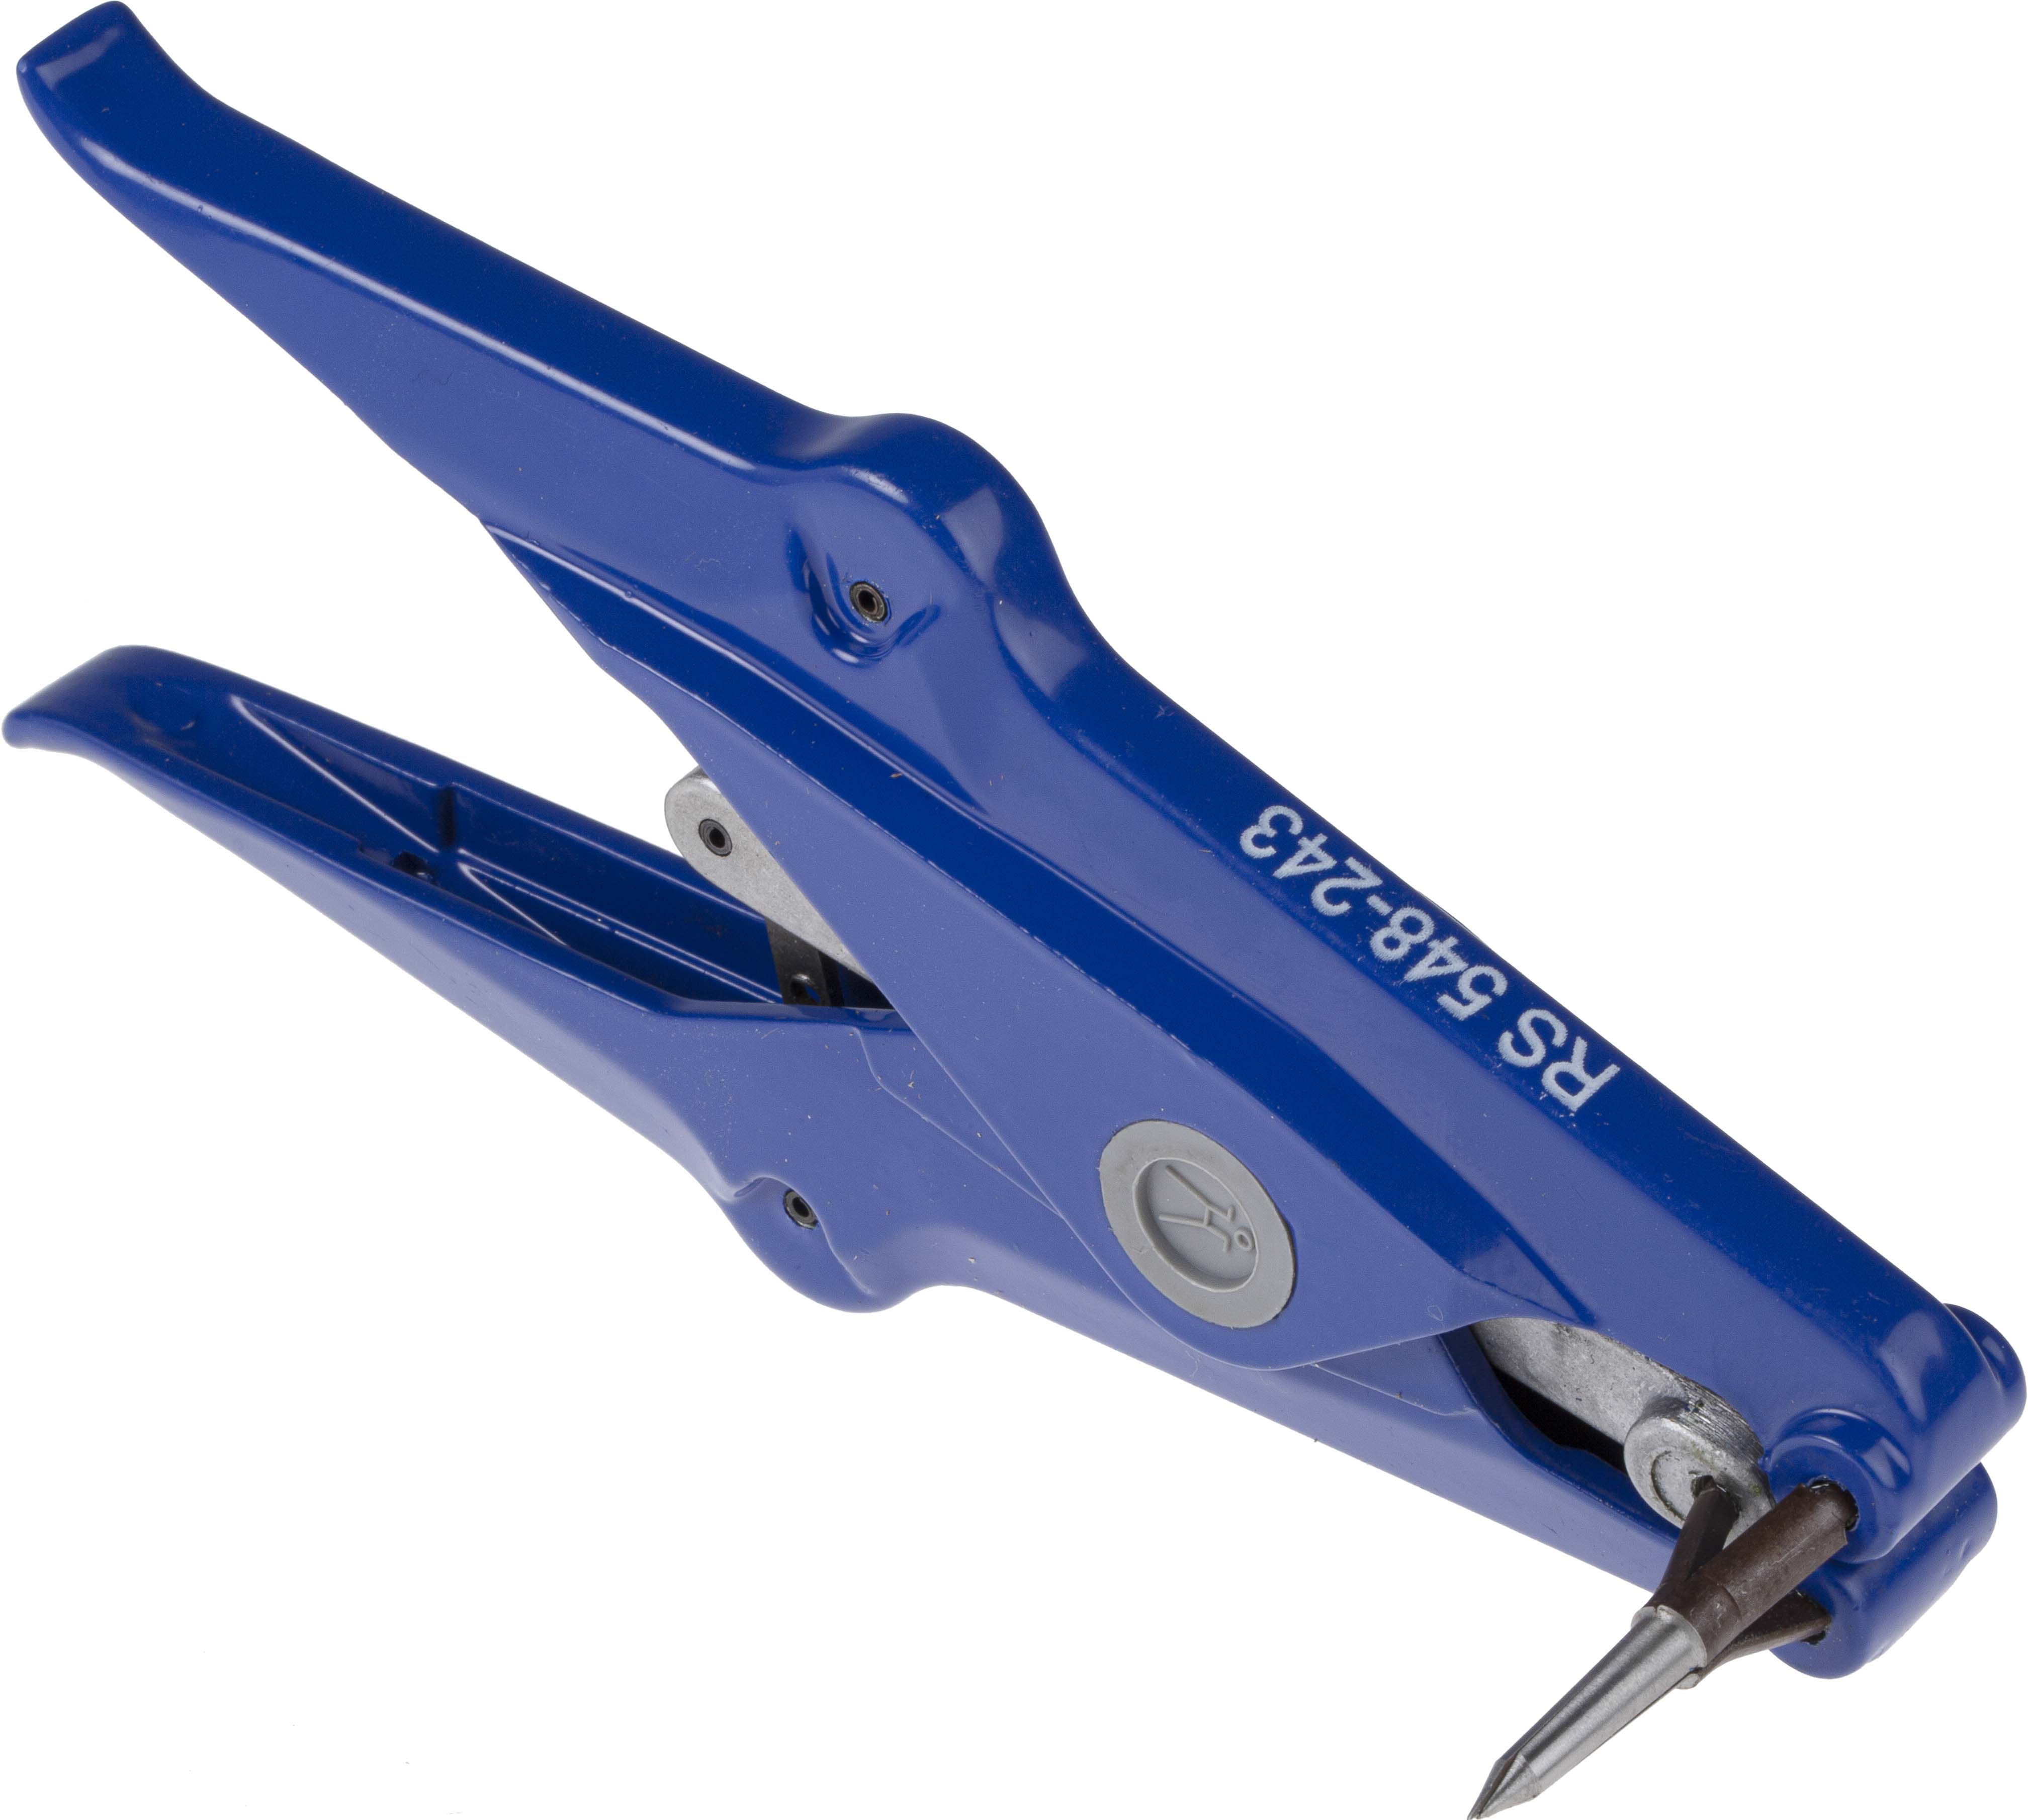 Cable Sleeve Tool Plier Prong, For Use With Sleeves Up to 2.0 mm Diameter